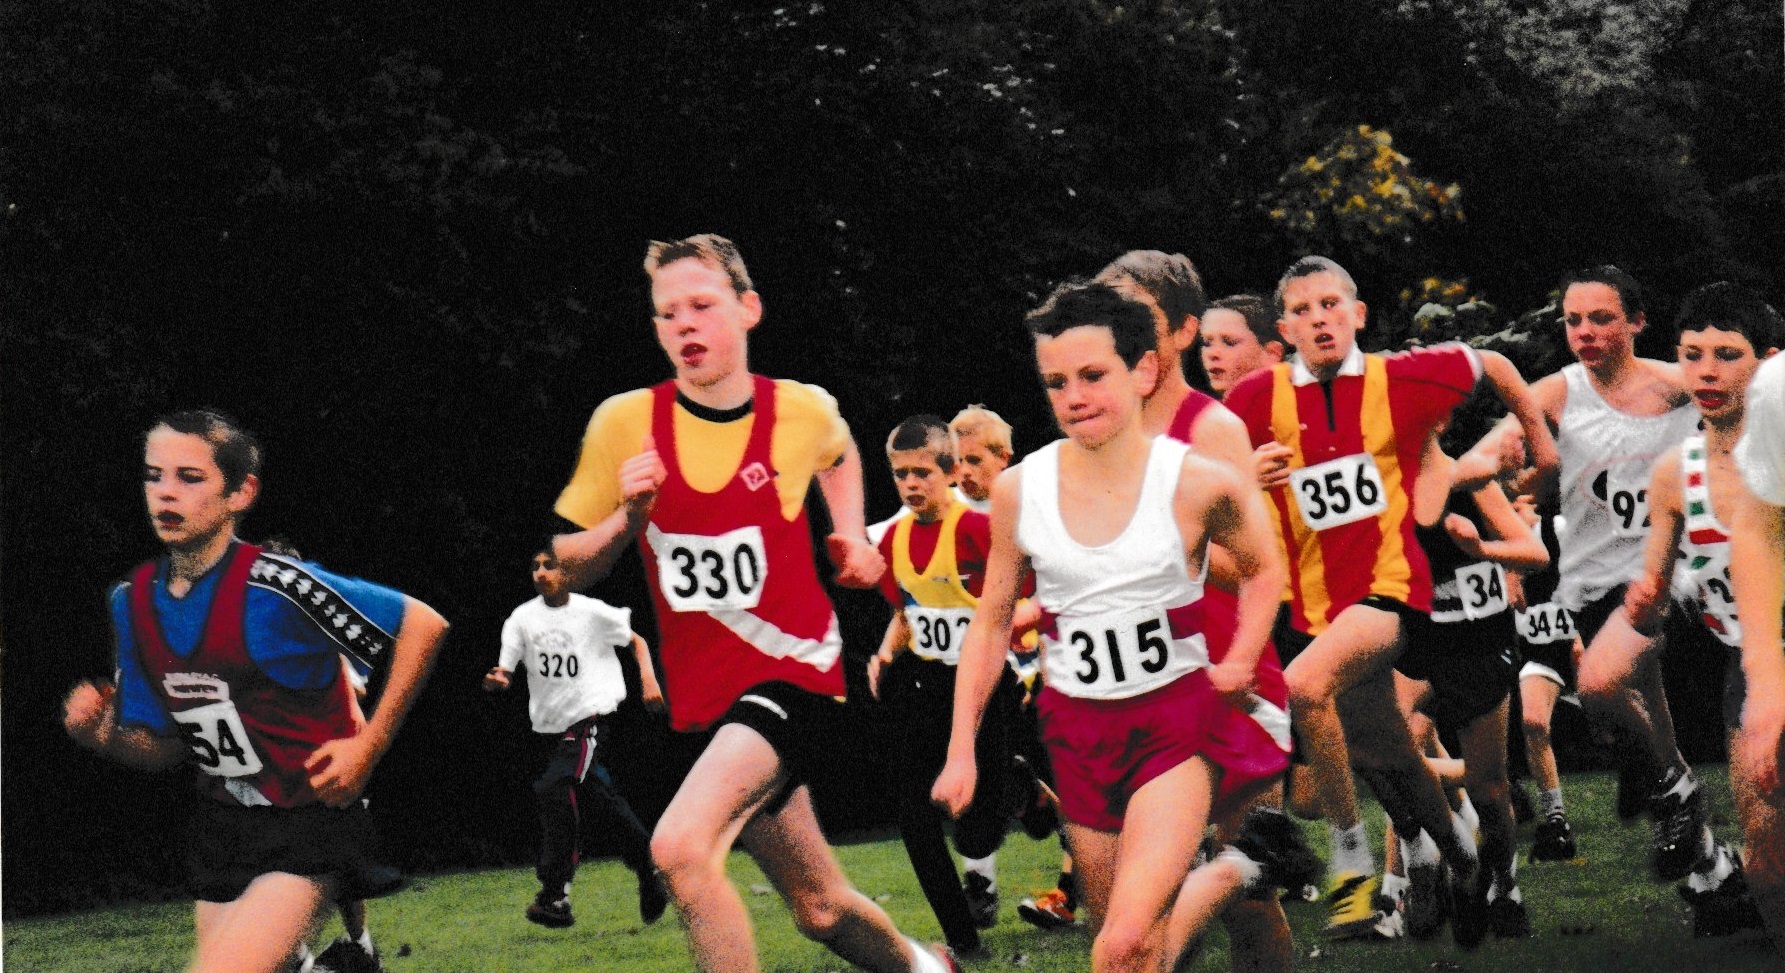 A young Richmond and Zetland athlete, in the red vest with a white stripe, running shoulder to shoulder with a young Alistair Brownlee on his journey to Olympic triathlon gold